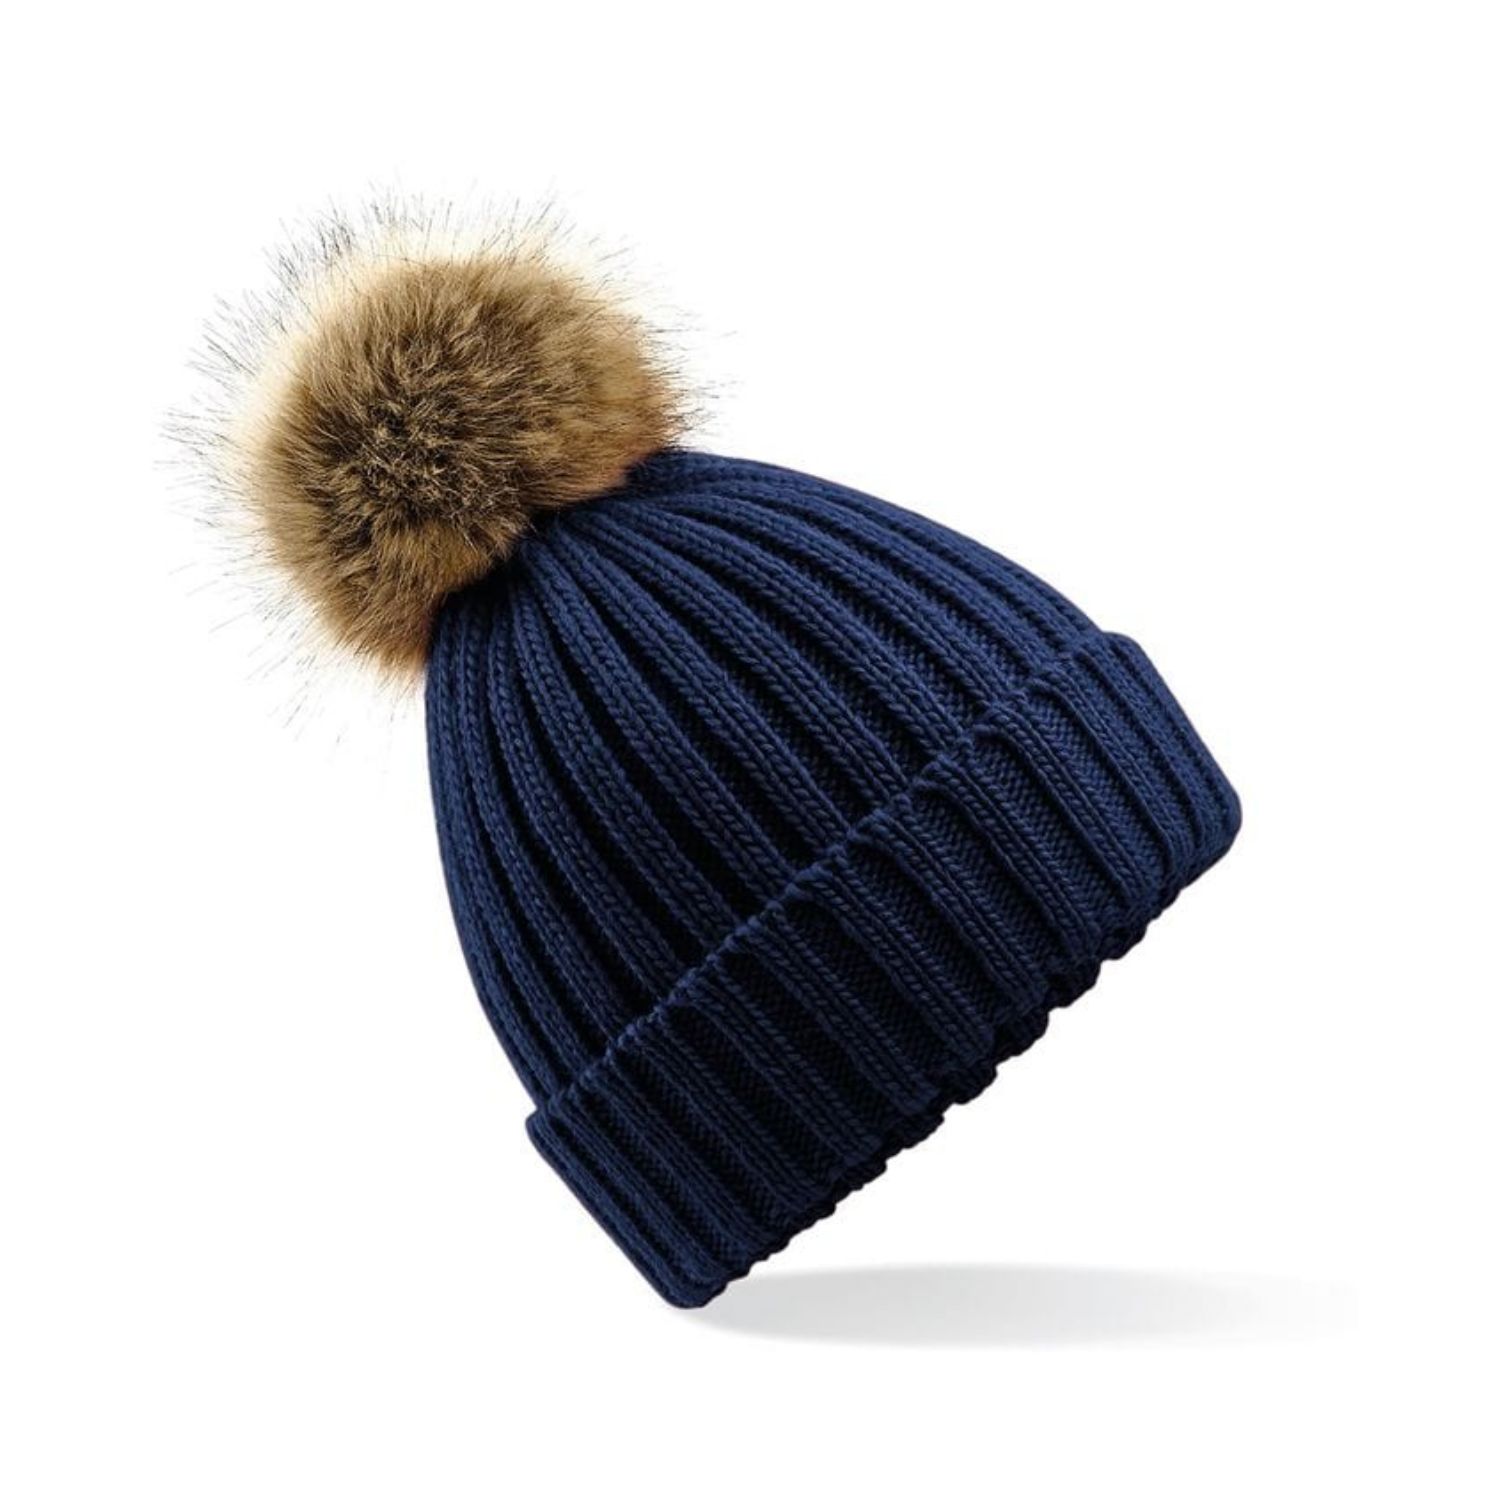 paperback Overgang Ale Muts PomPon beanie - EquiStitch